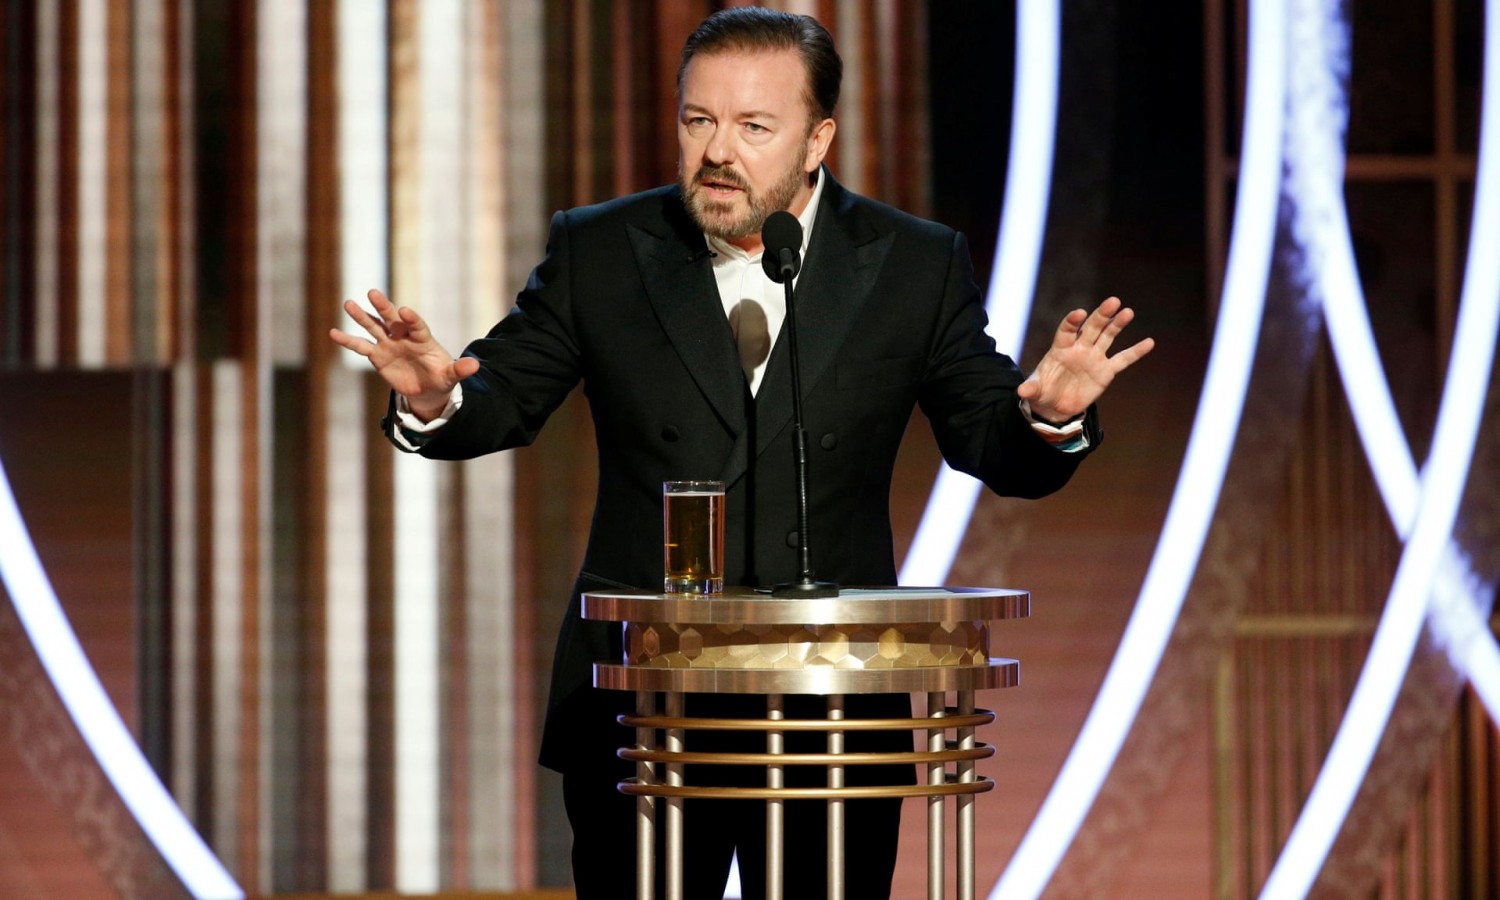 Ricky Gervais at the Golden Globes. Photograph: Handout ./Reuters